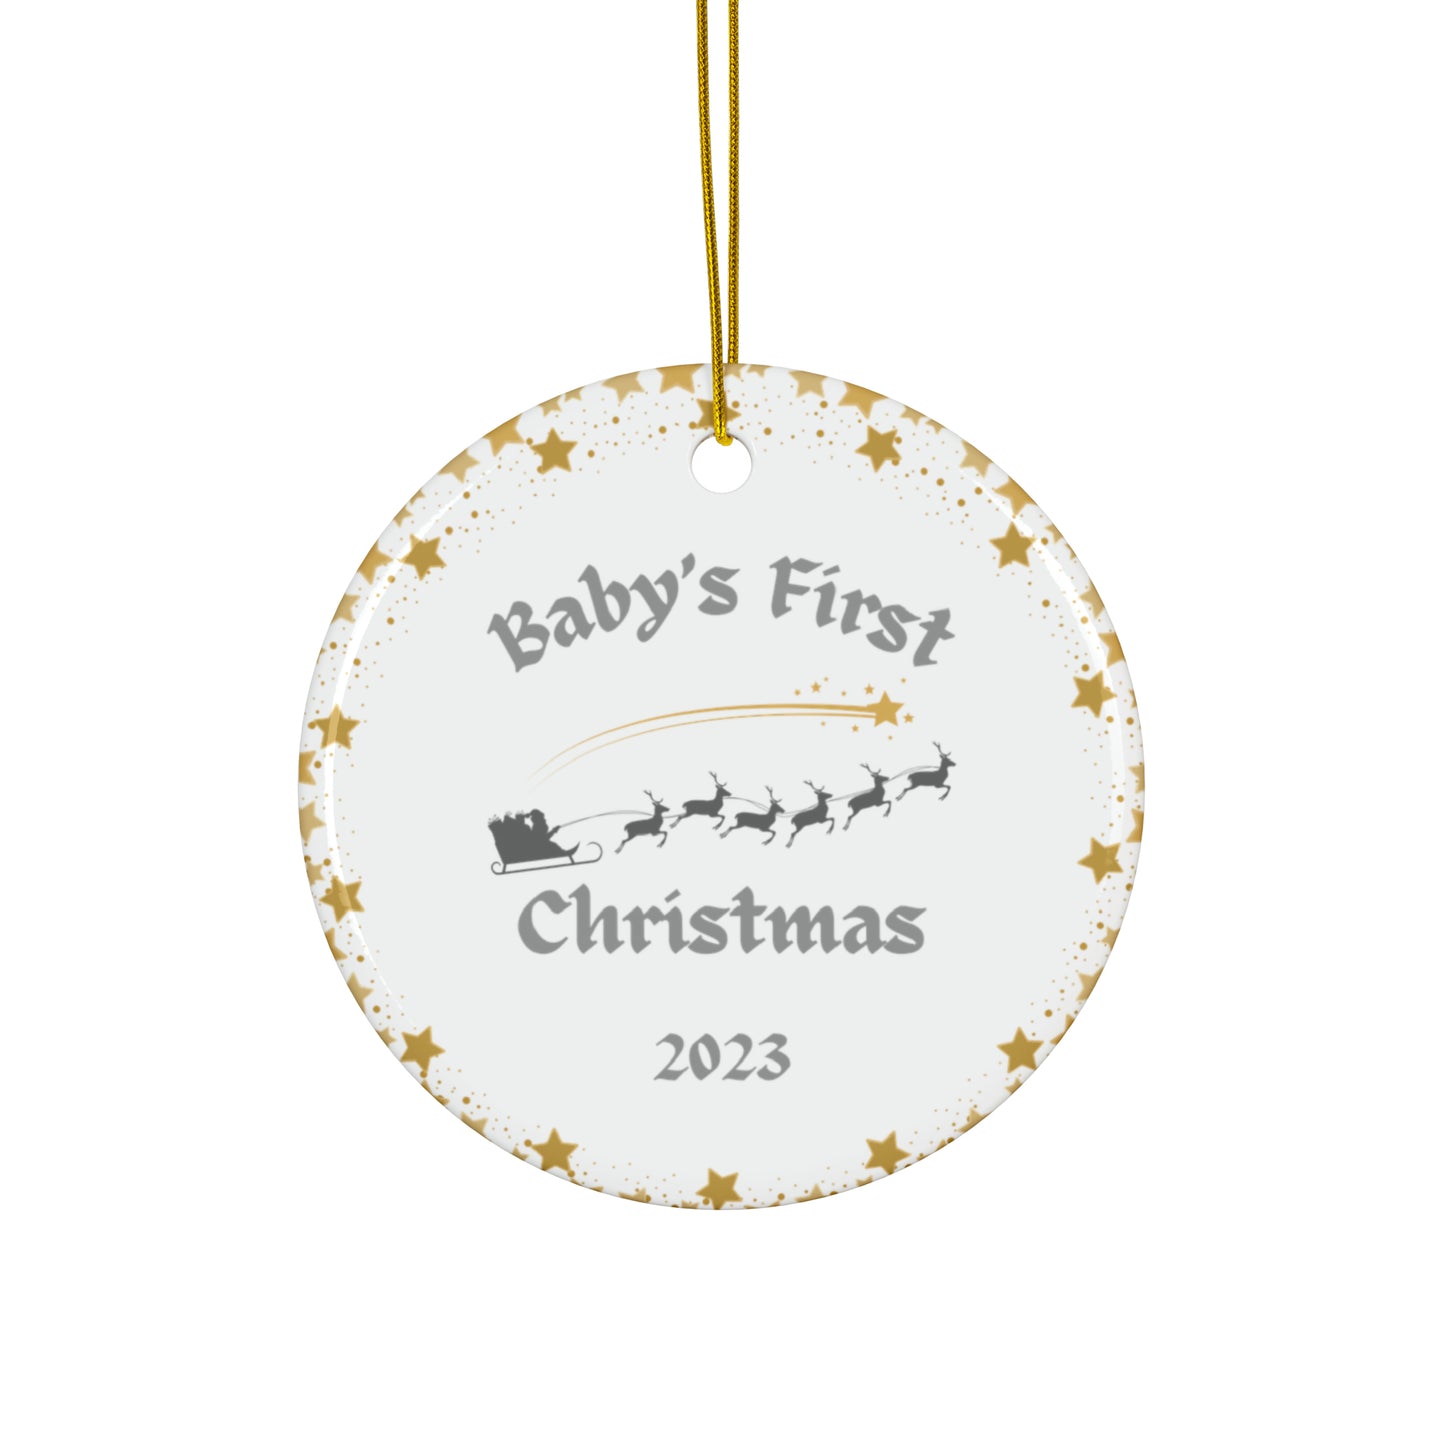 Baby's First Christmas Ceramic Ornament | Grey and Yellow Christmas Decoration | Baby's First Christmas 2023